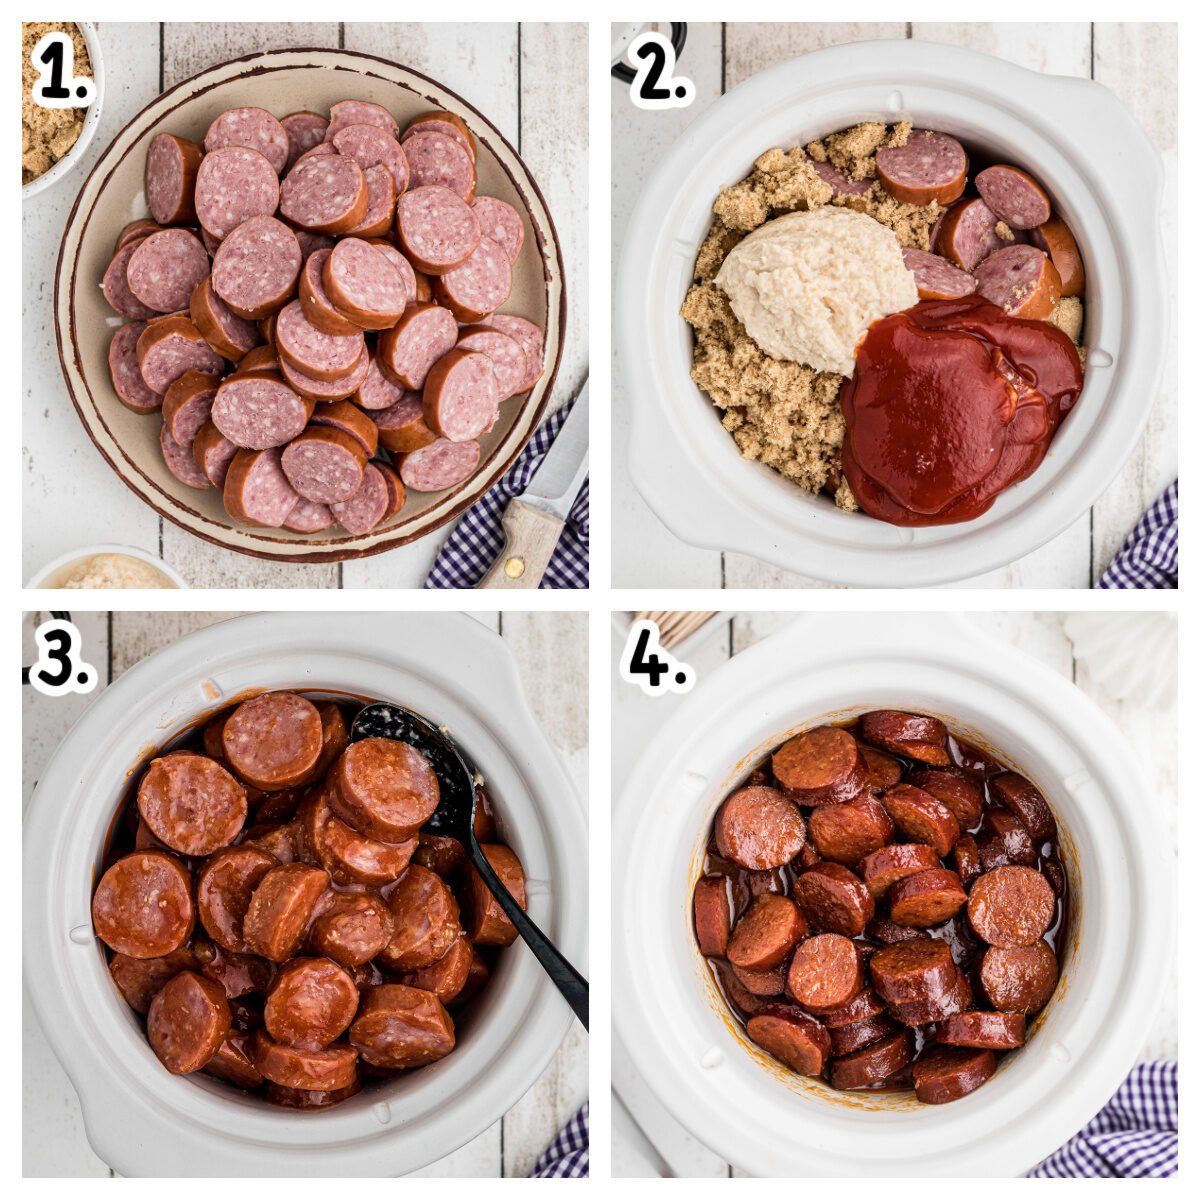 Four images of how to make keilbasa in ketchup and horseradish sauce.